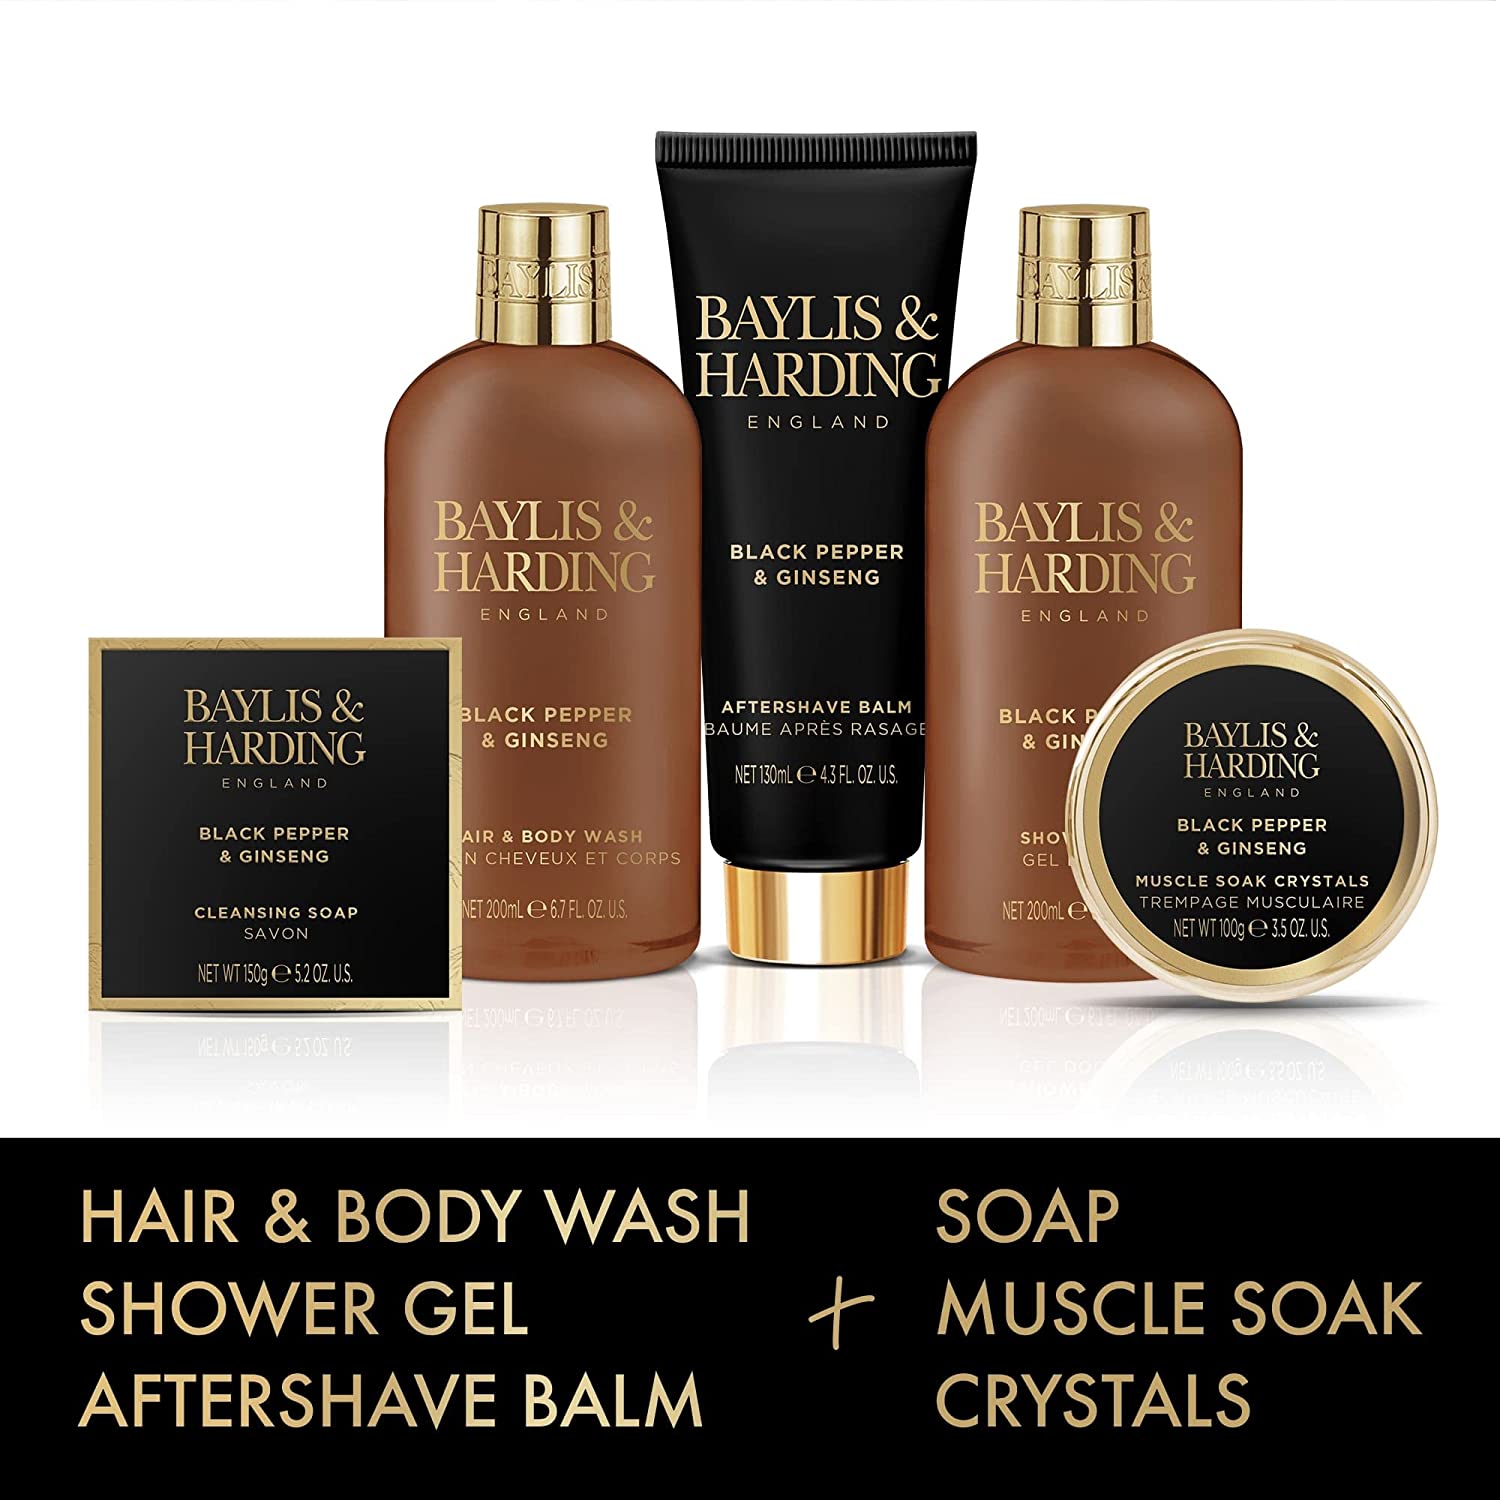 BAYLIS & HARDING BLACK PEPPER & GINSENG PERFECT GROOMING GIFT PACK